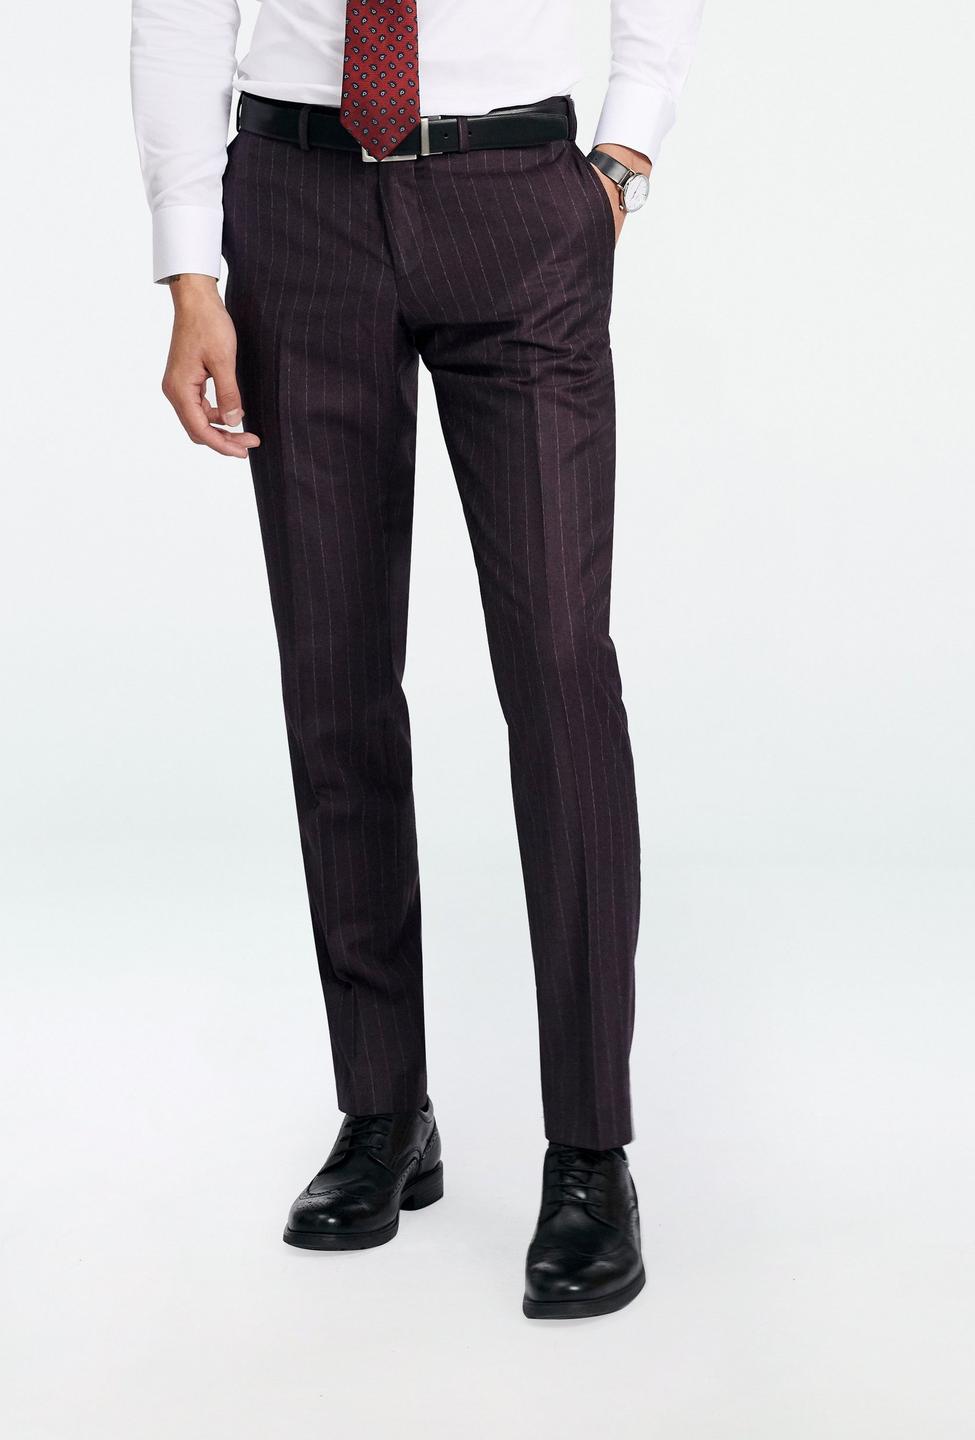 Purple pants - Reigate Striped Design from Seasonal Indochino Collection